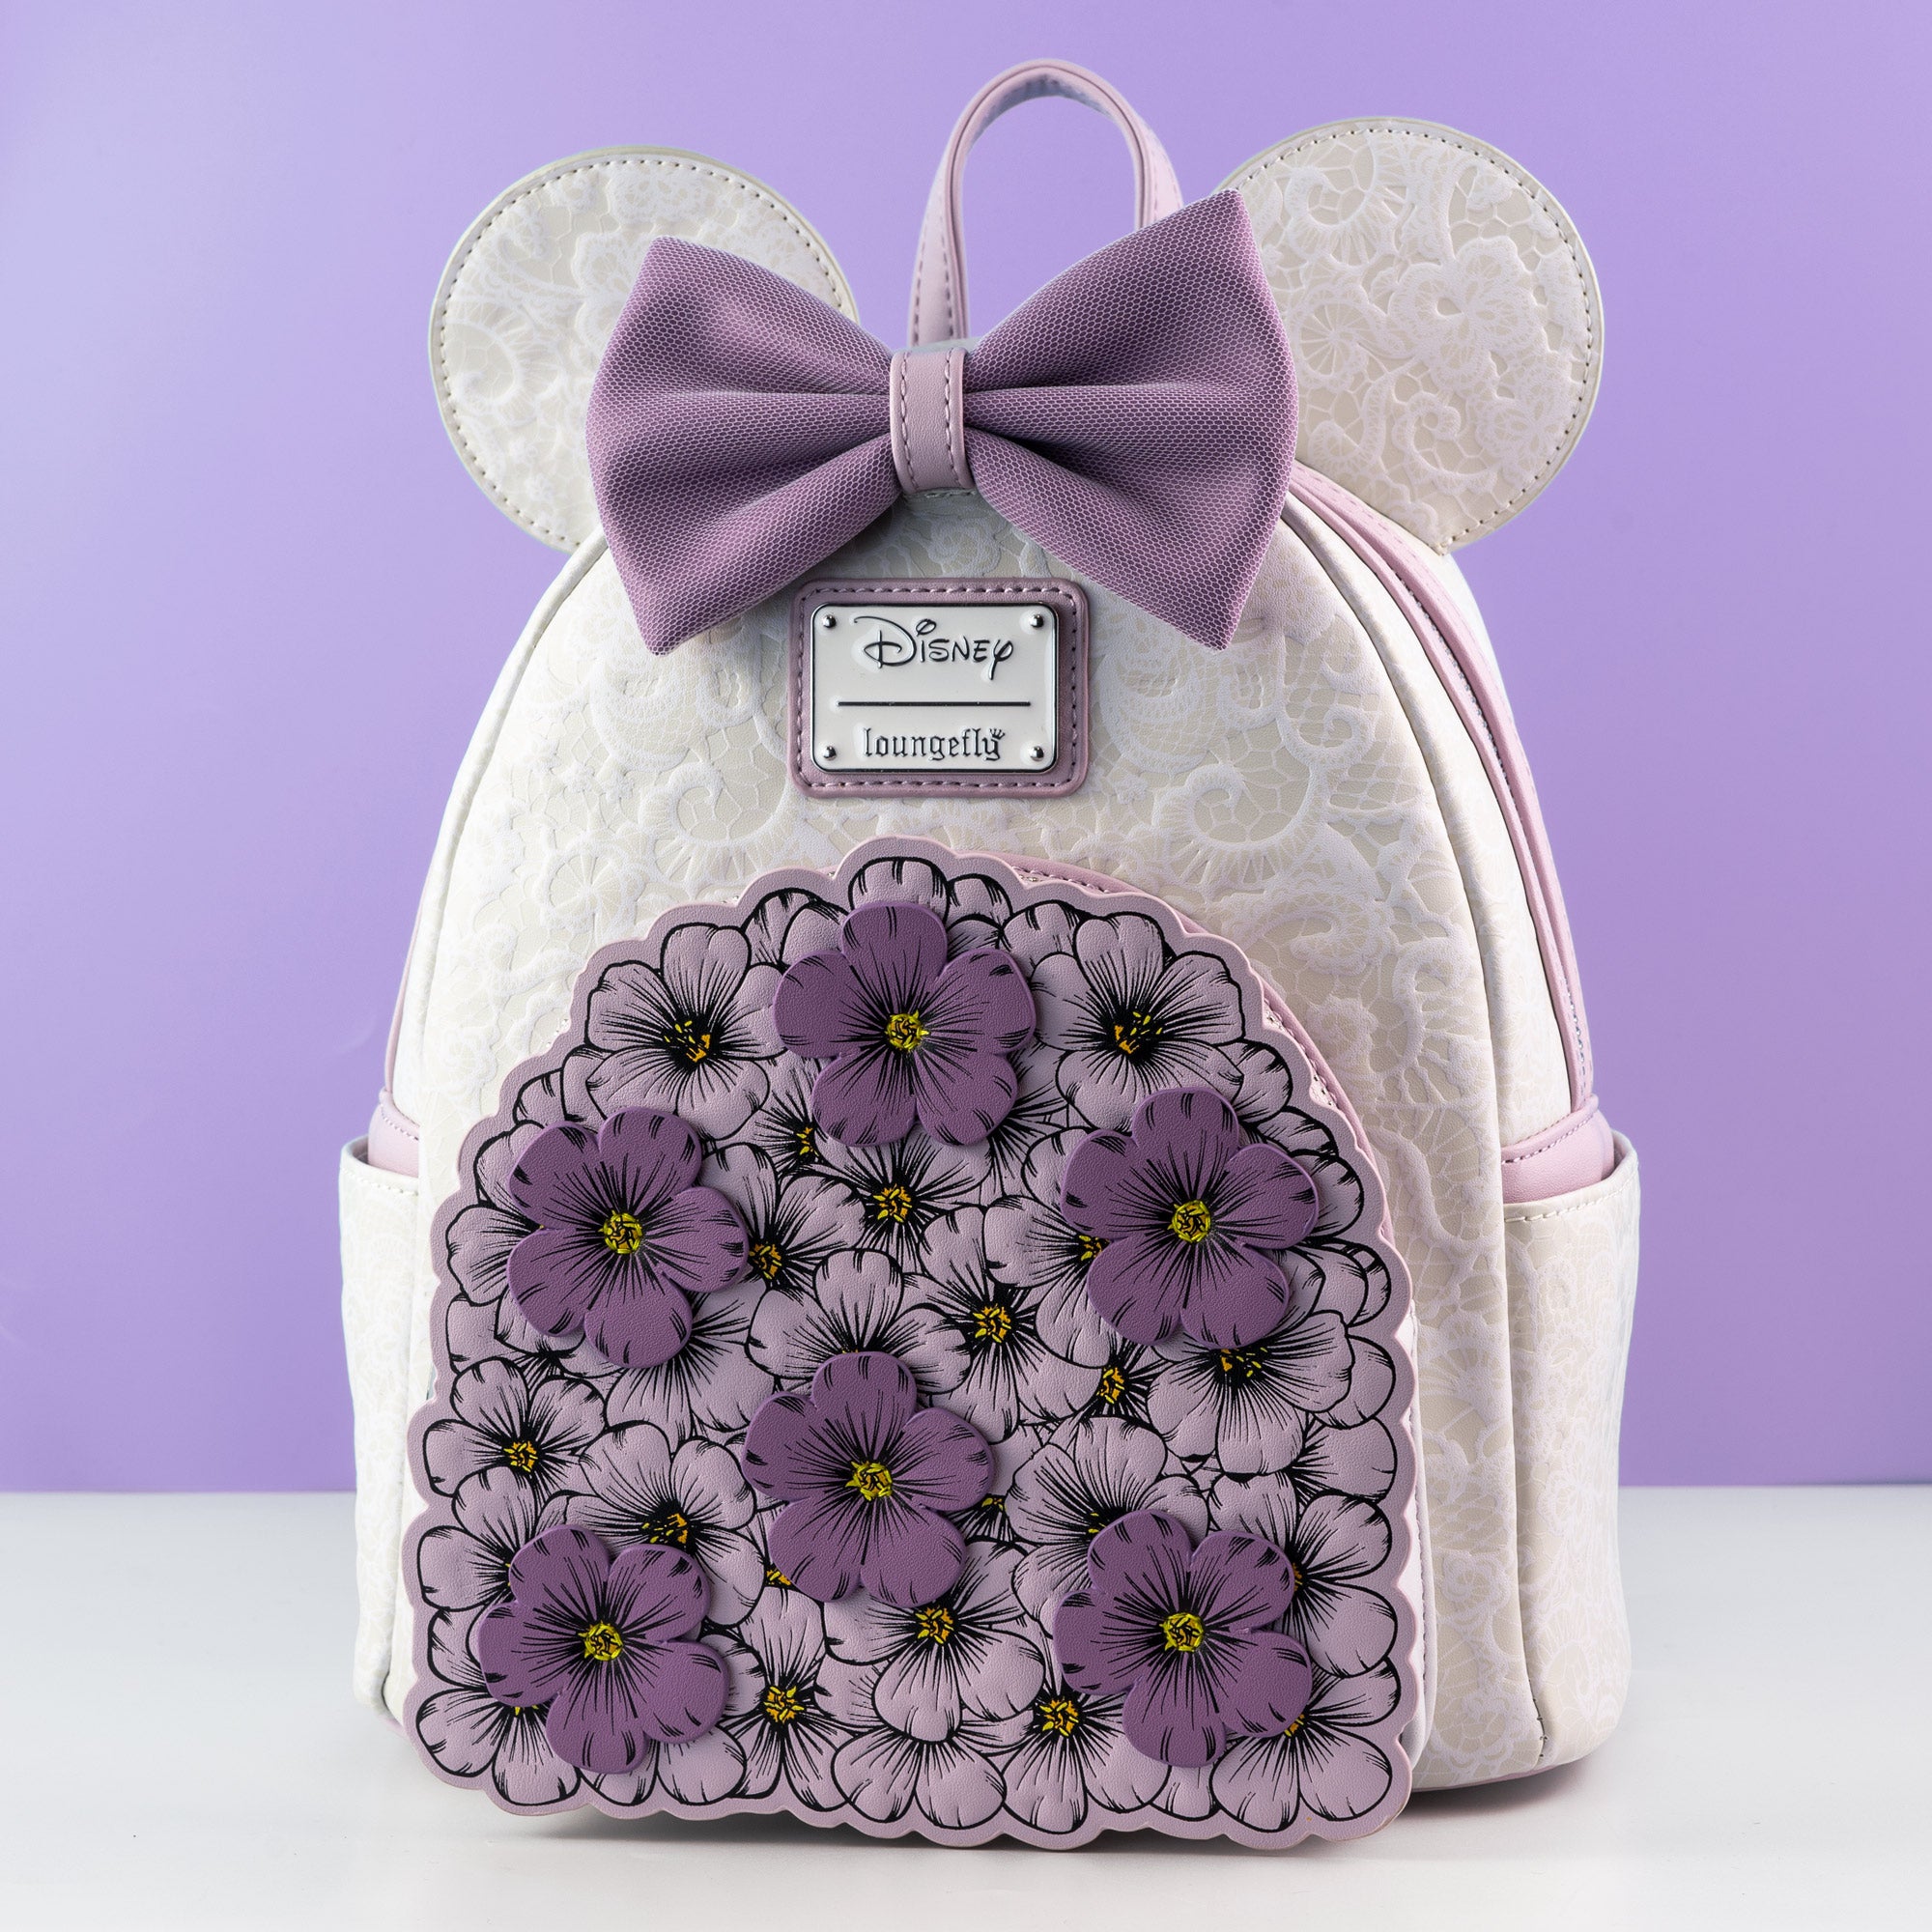 Loungefly x Disney Minnie Mouse Floral Wedding Bouquet Mini Backpack